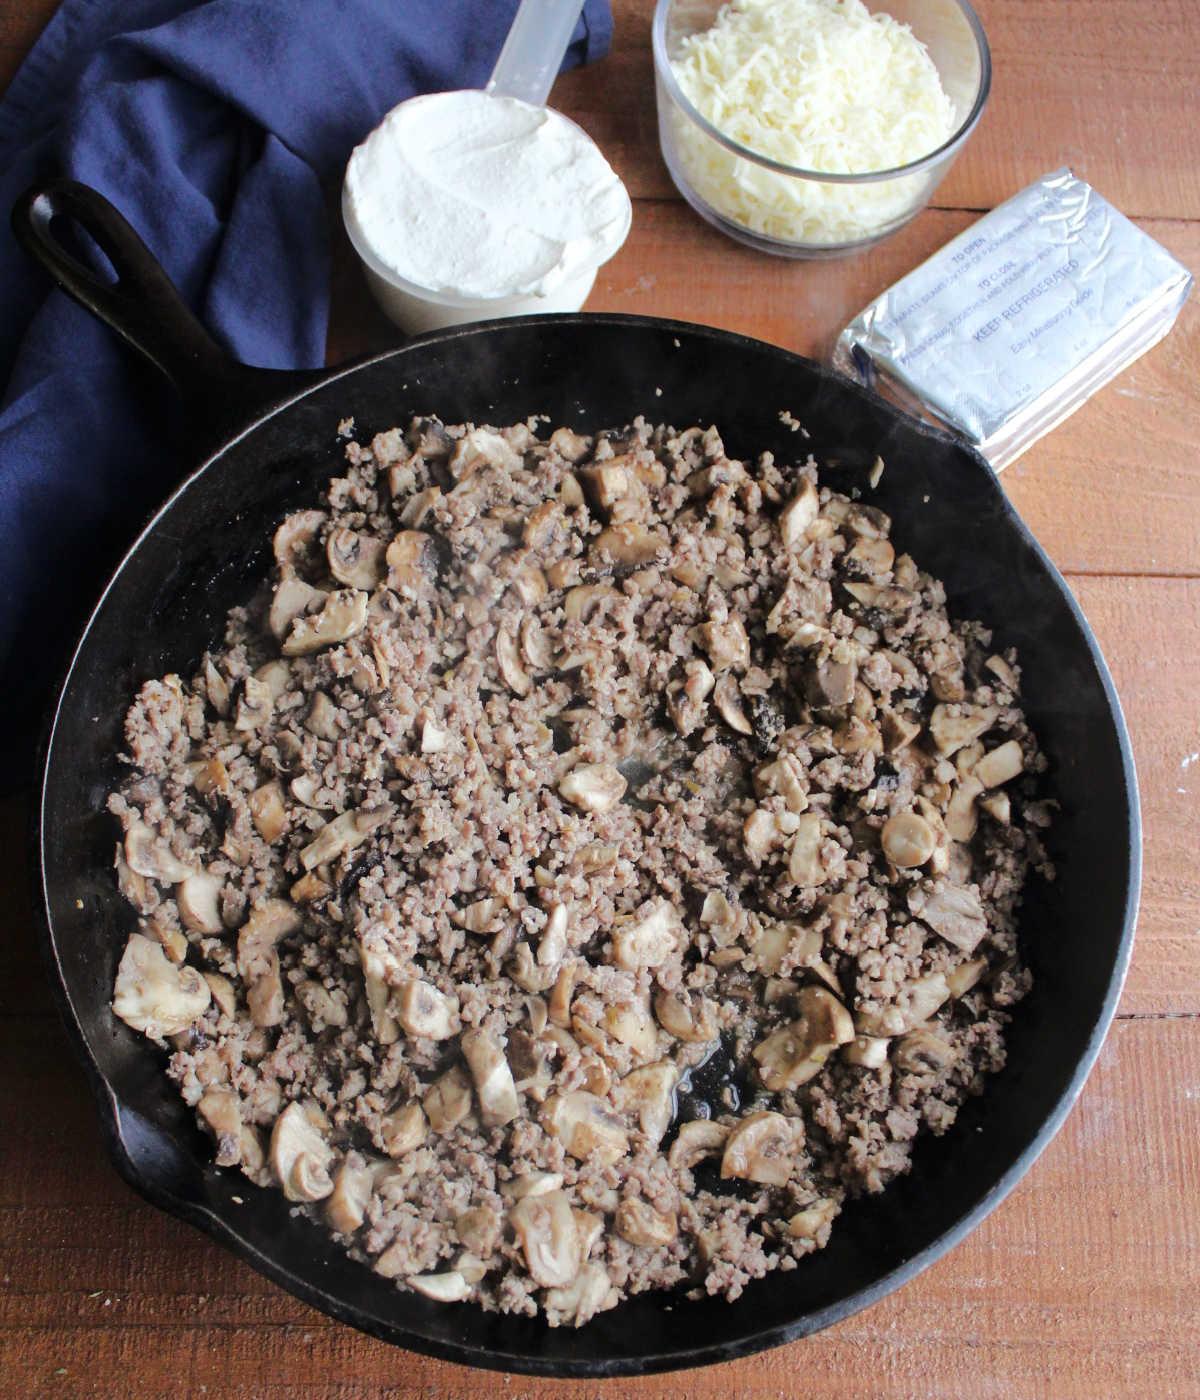 Large cast iron skillet filled with browned sausage and mushrooms next to cream cheese, sour cream, and shredded cheese.